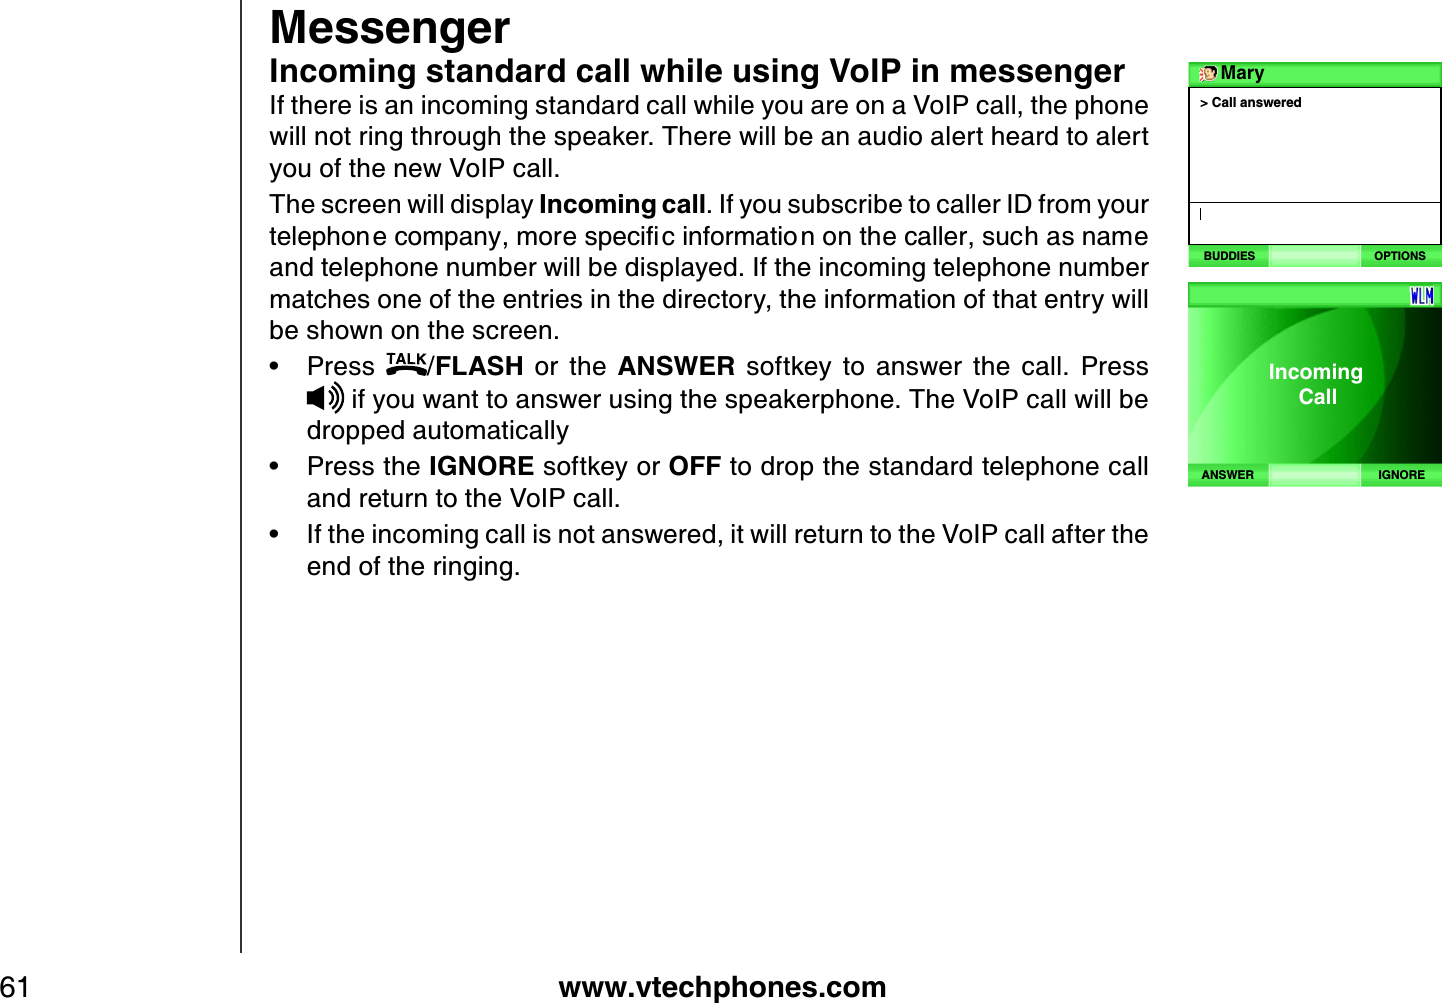 www.vtechphones.com61MessengerIncoming standard call while using VoIP in messengerIf there is an incoming standard call while you are on a VoIP call, the phone will not ring through the speaker. There will be an audio alert heard to alert you of the new VoIP call.The screen will display Incoming call. If you subscribe to caller ID from your VGNGRJQPGEQORCP[OQTGURGEKſEKPHQTOCVKQPQPVJGECNNGTUWEJCUPCOGand telephone number will be displayed. If the incoming telephone number matches one of the entries in the directory, the information of that entry will be shown on the screen.Press  /FLASH  or  the  ANSWER  softkey  to  answer  the  call.  Press  if you want to answer using the speakerphone. The VoIP call will be dropped automaticallyPress the IGNORE softkey or OFF to drop the standard telephone call and return to the VoIP call. If the incoming call is not answered, it will return to the VoIP call after the end of the ringing. •••&gt; Call answeredMaryBUDDIES OPTIONSIGNOREANSWERIncoming     Call 